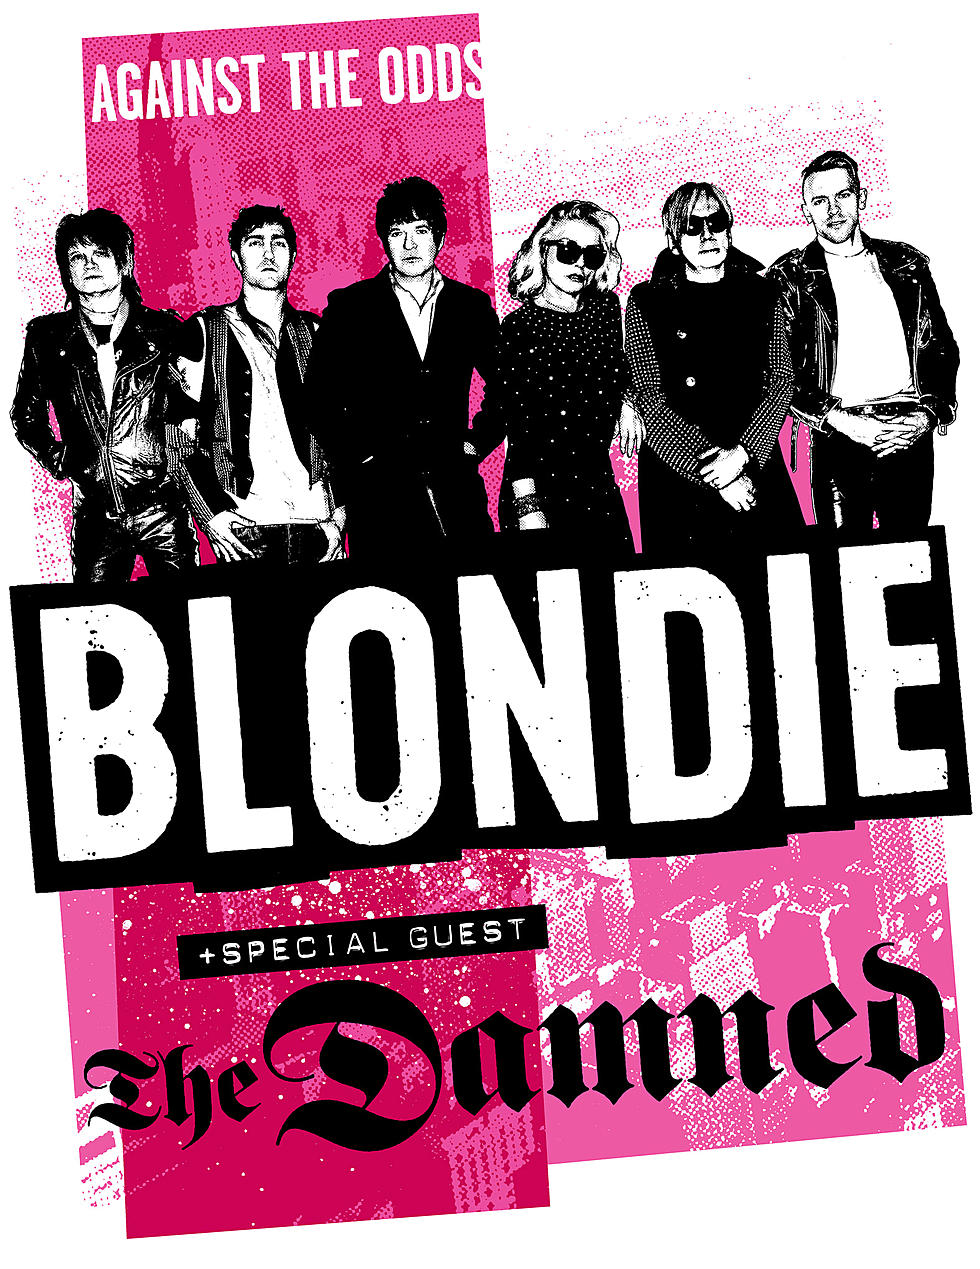 Blondie expands tour with The Damned, including 2 NYC shows